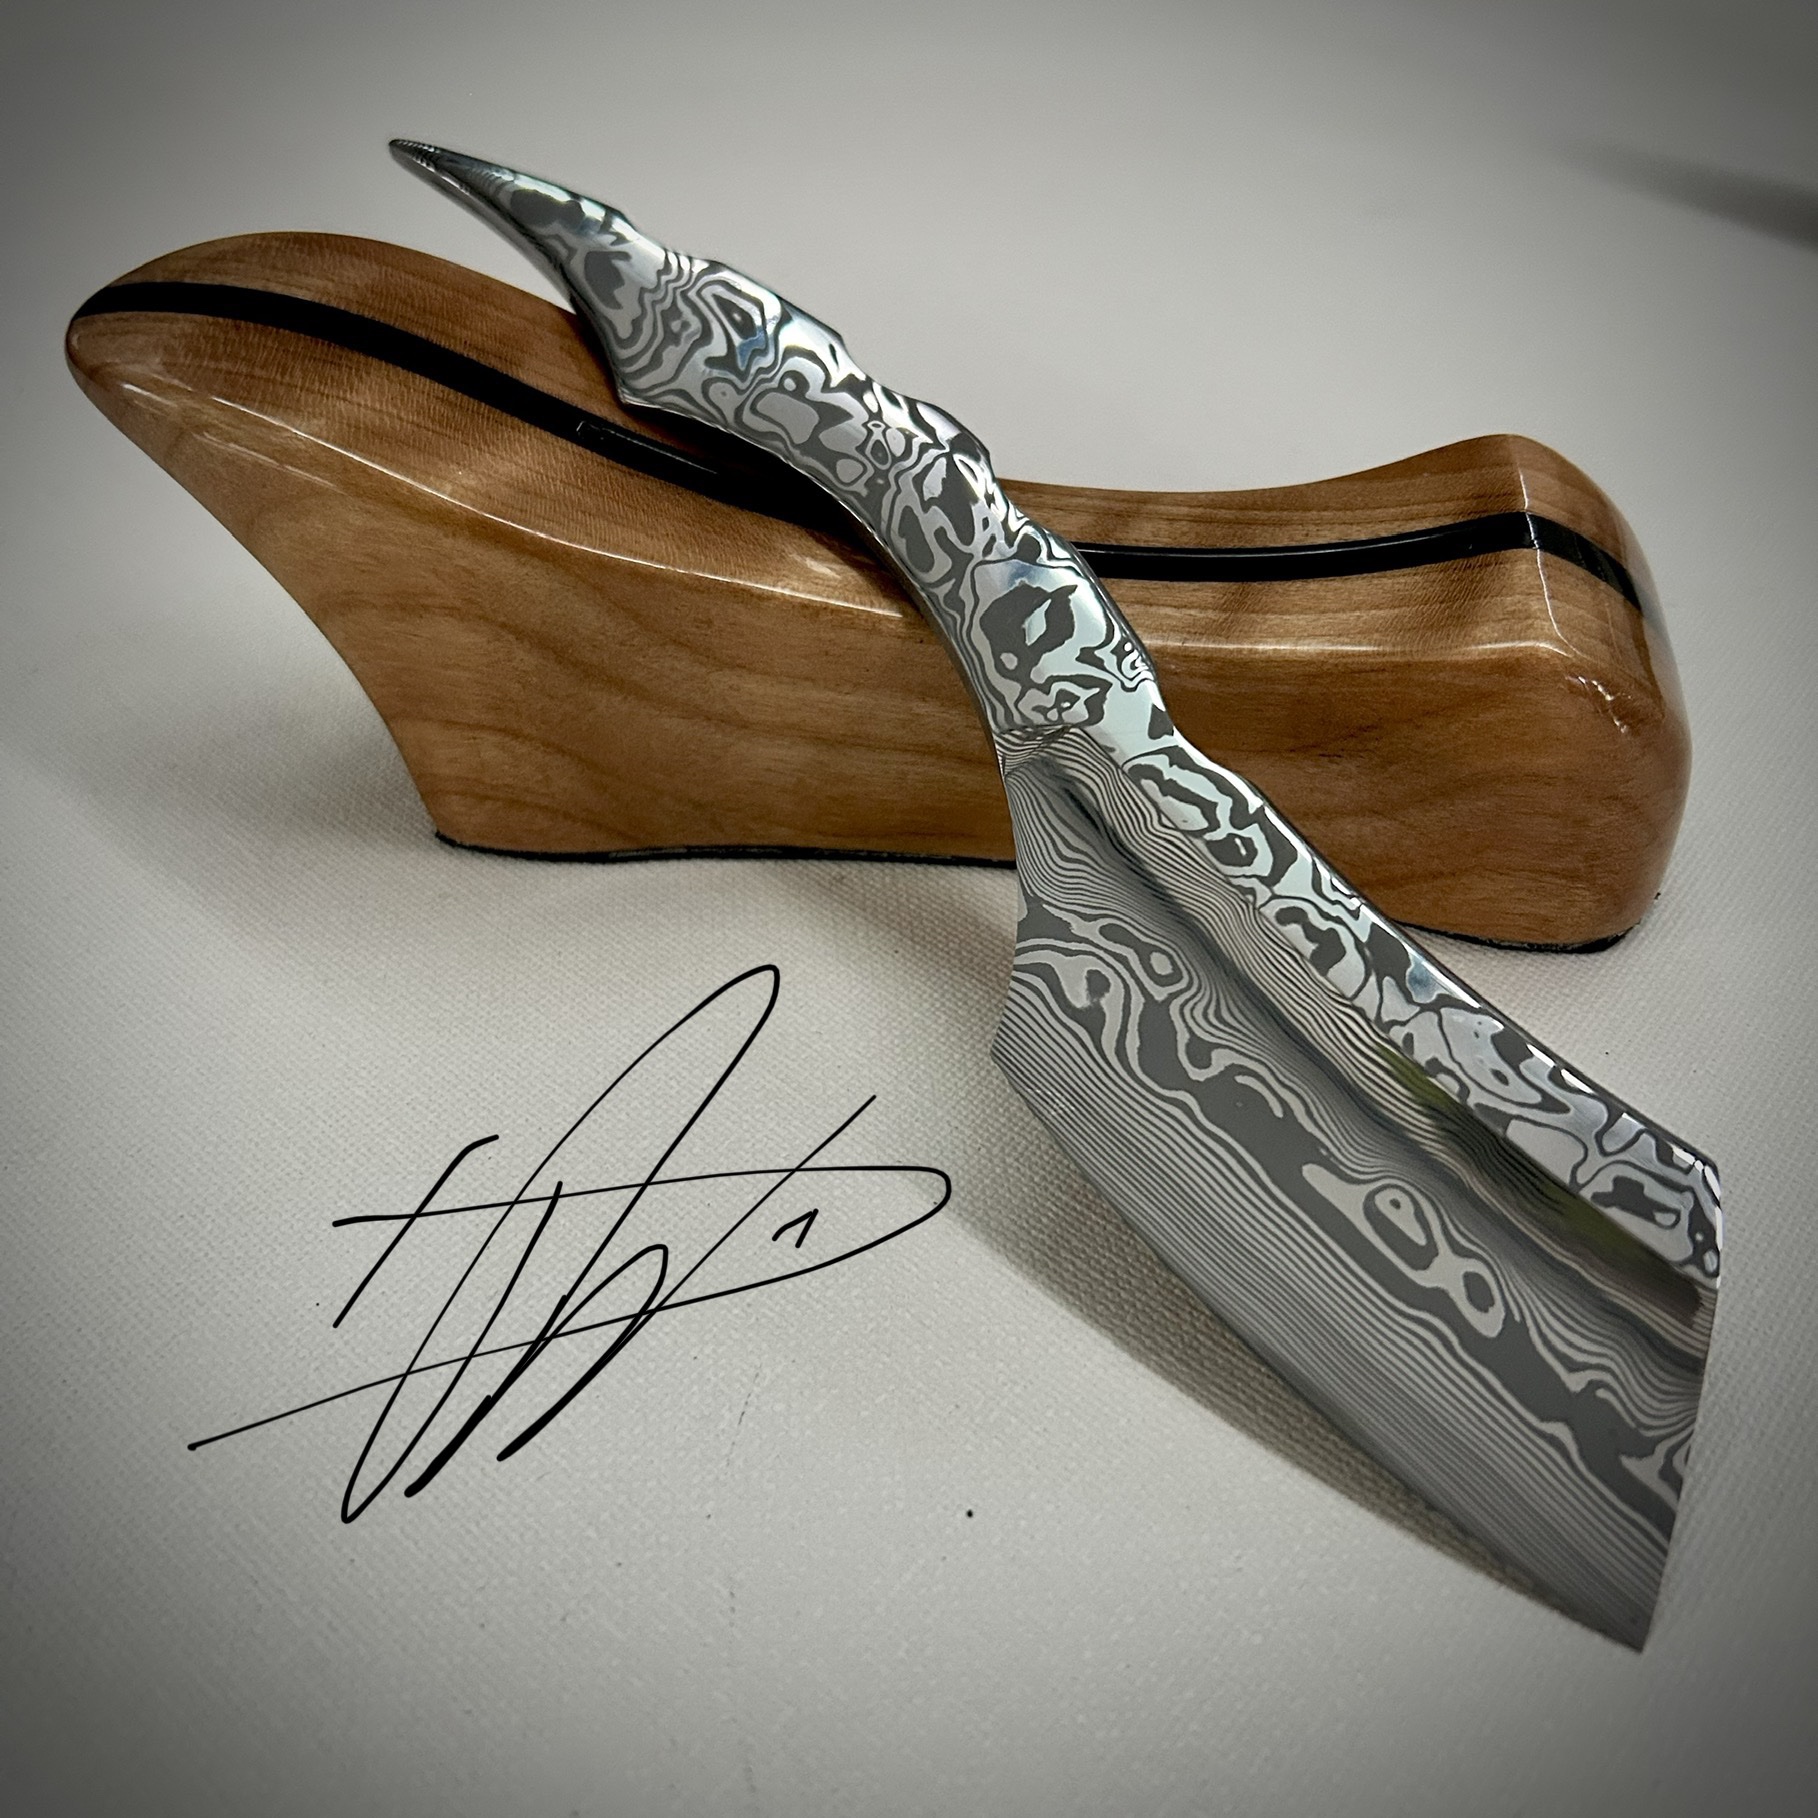 Woolfblades 349 Custom Made in a Vinland Damasteel razor ,And the counter stand is made in a solid wood with carbon fibre inlays and is magnetic